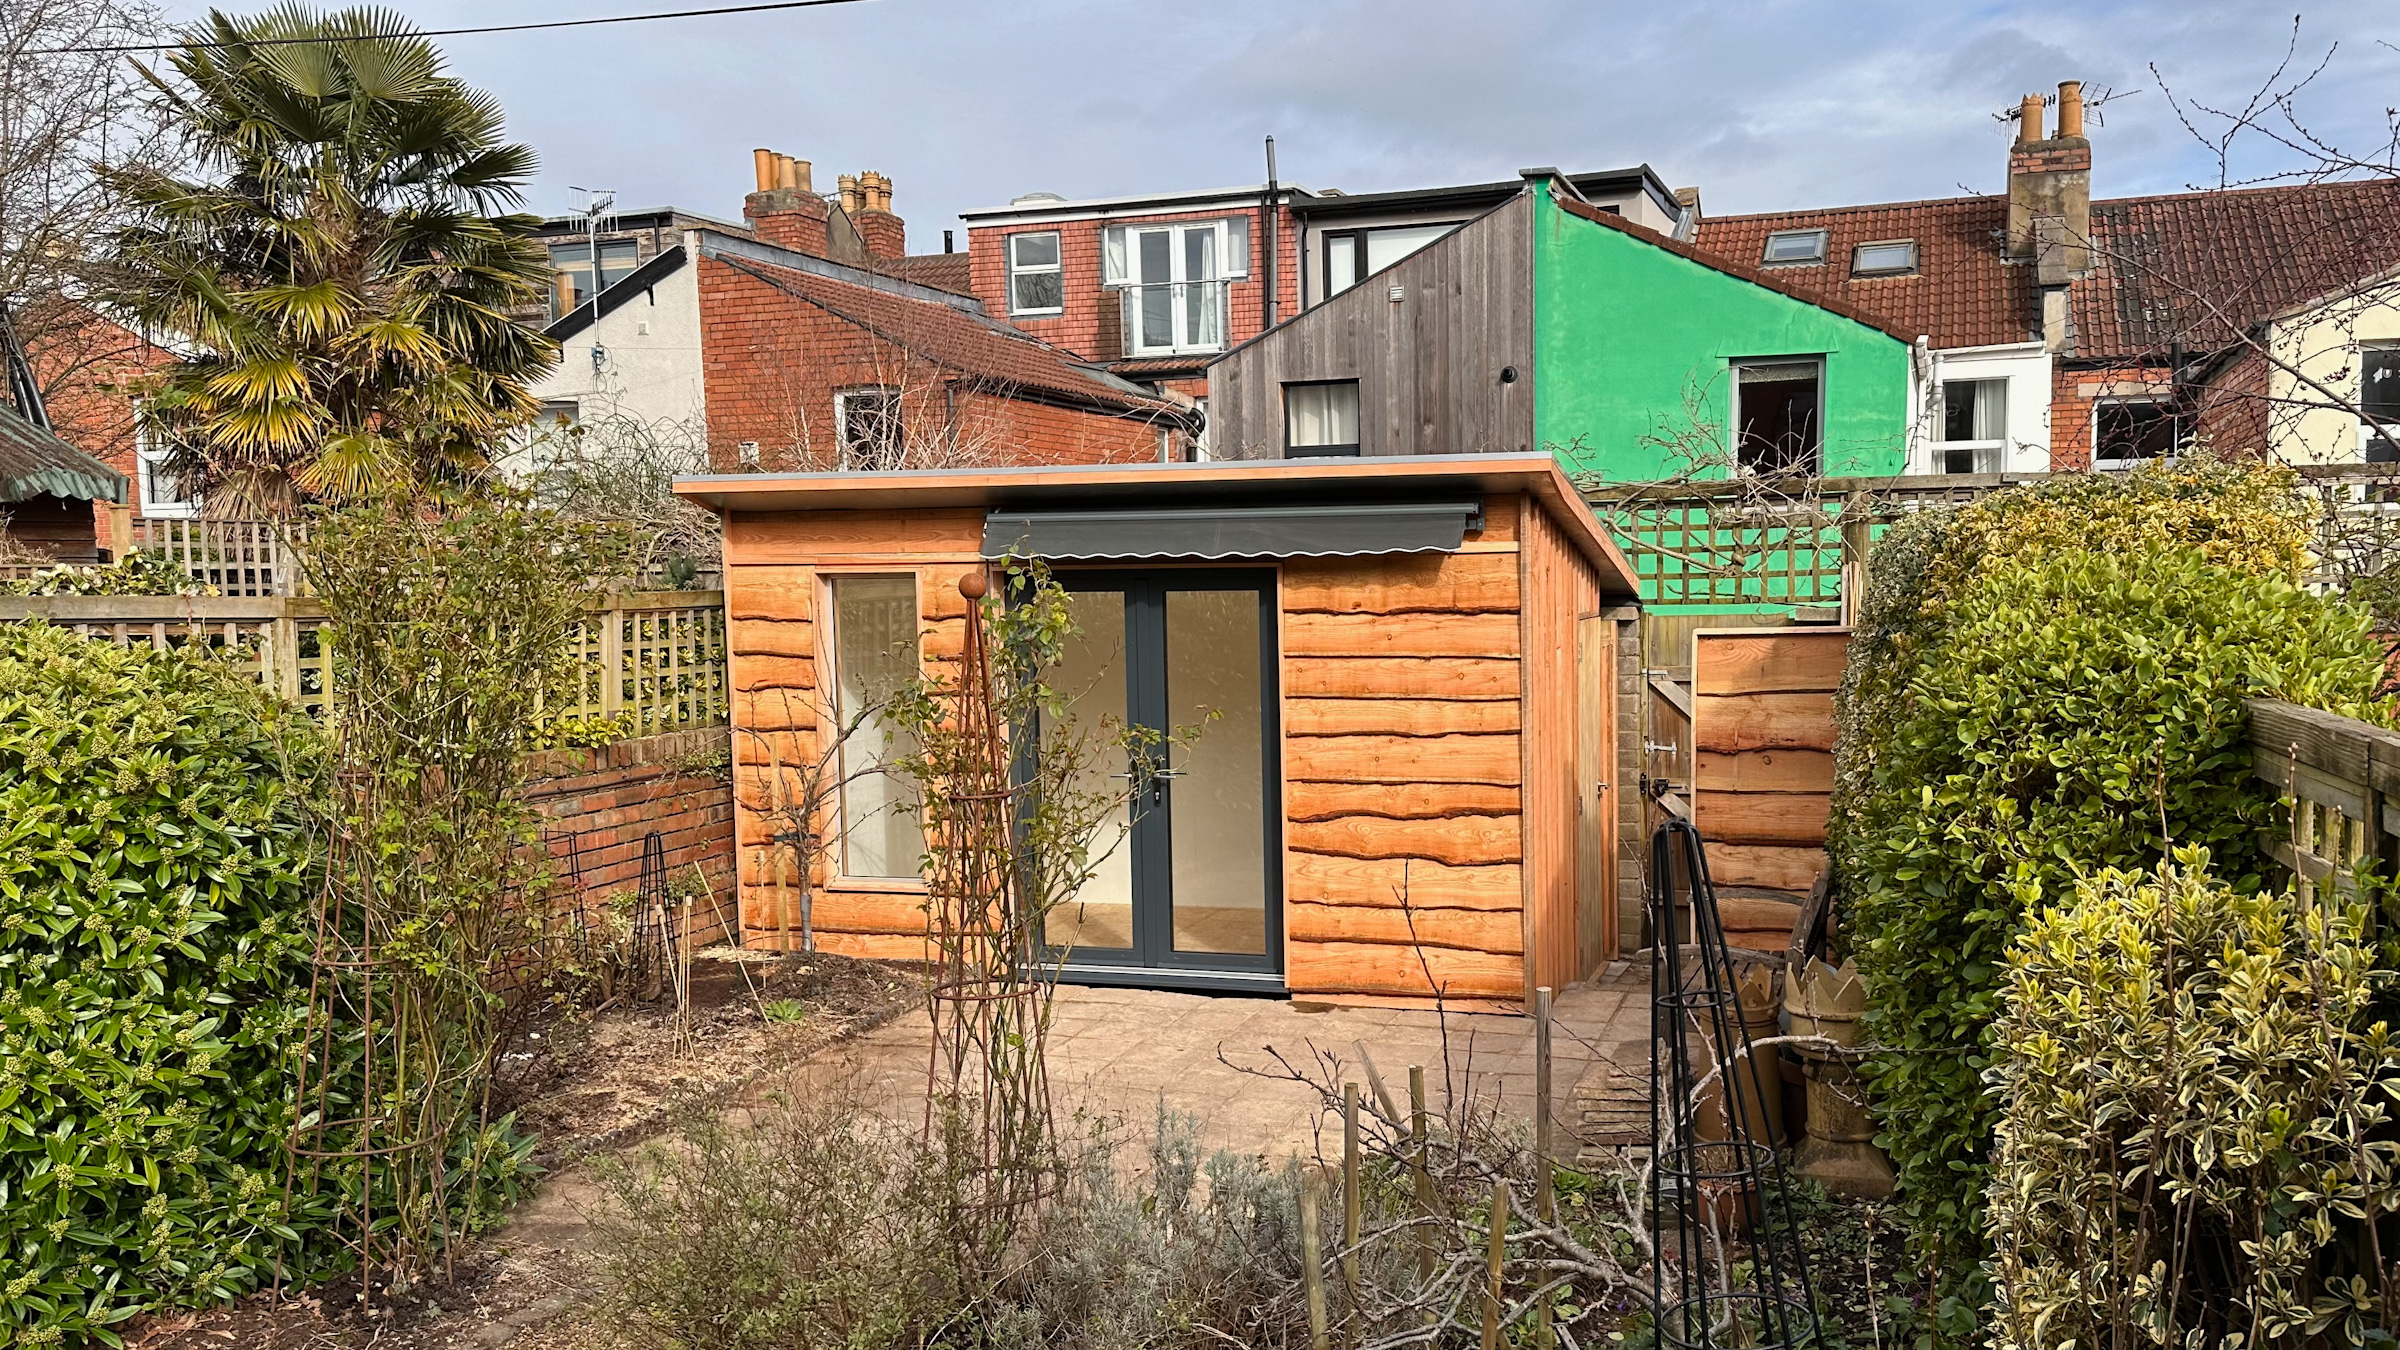 Bespoke design allows a cabin to fit any tight garden location